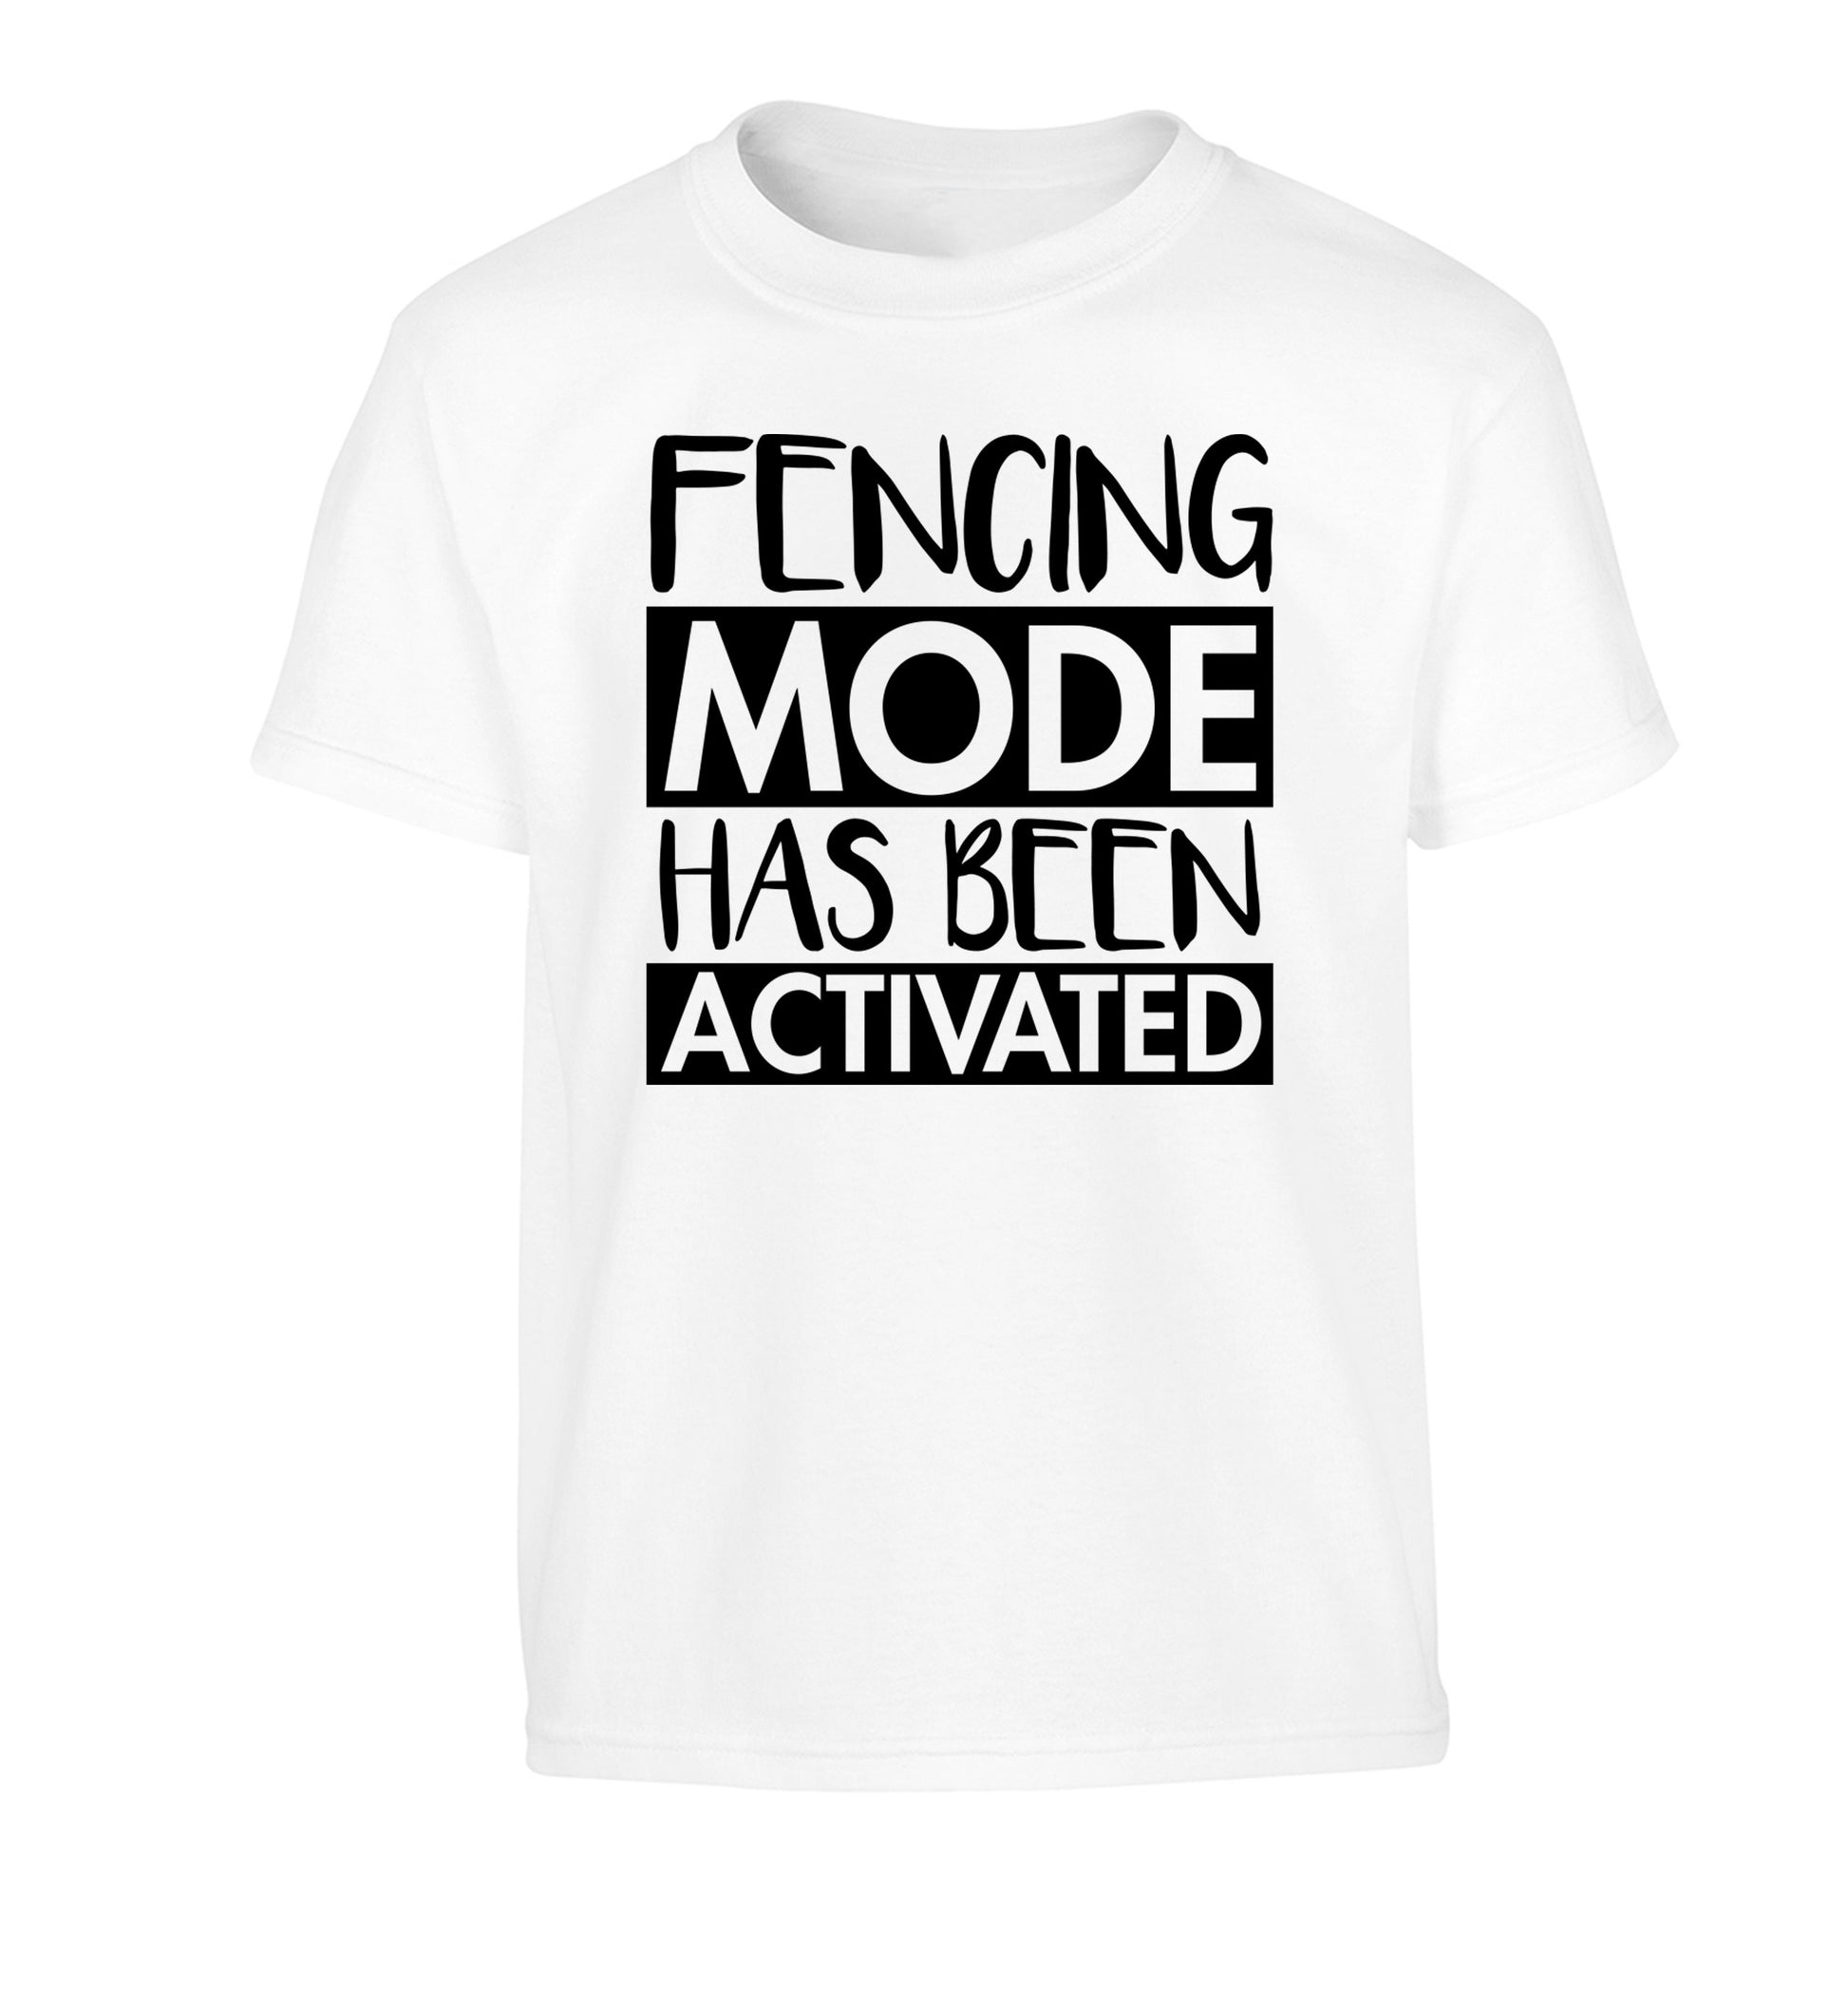 Fencing mode activated Children's white Tshirt 12-14 Years